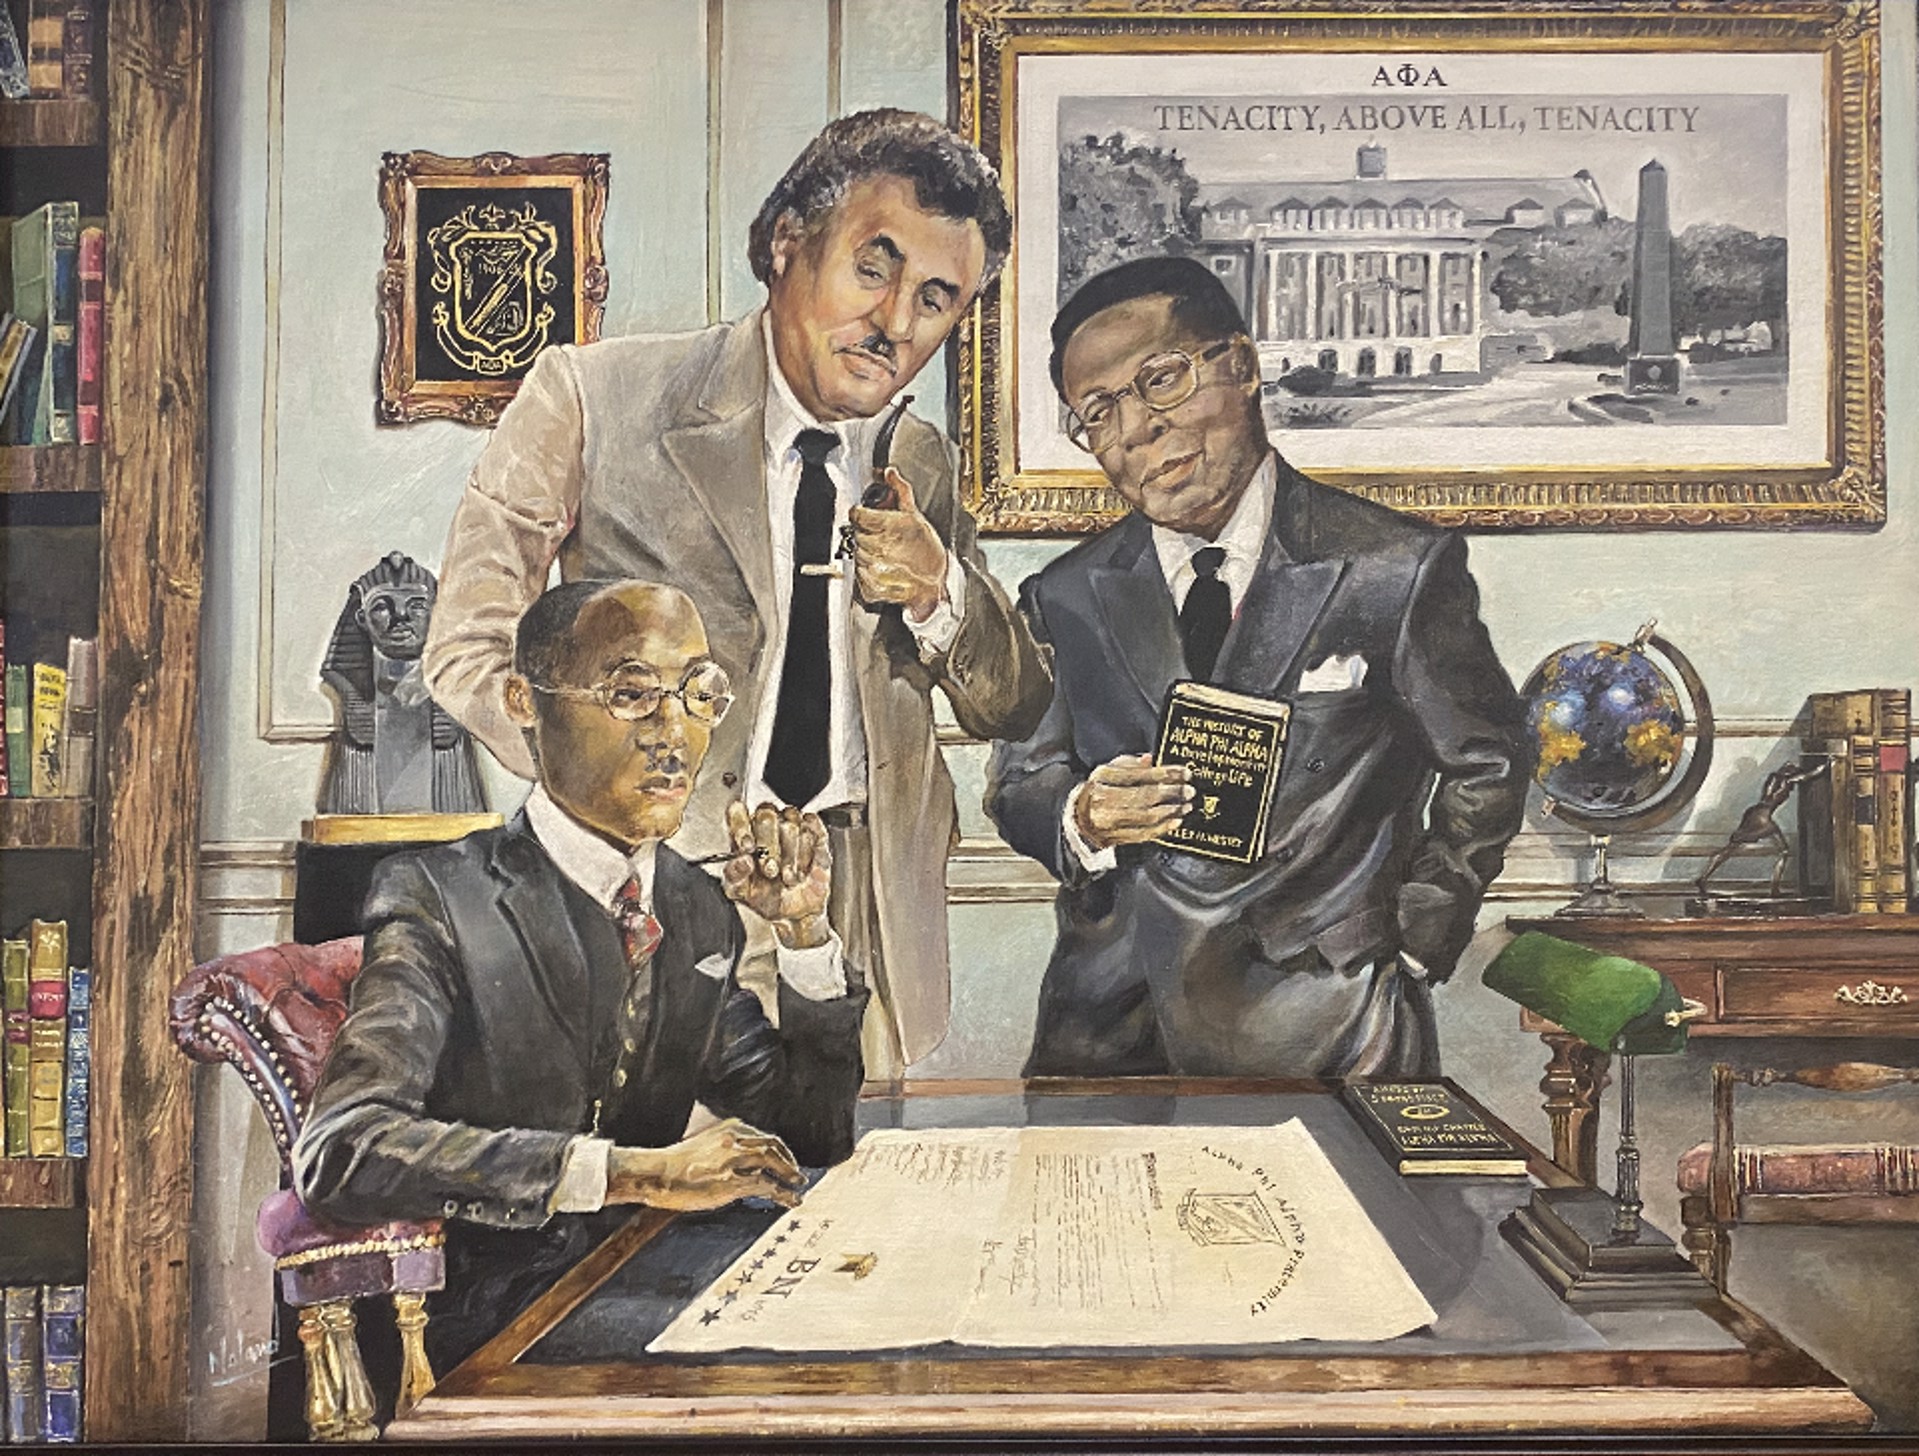 LE Hand Embellished Giclee on Canvas : Transcendent Achievement Through Transformational Leadership by Noland Anderson